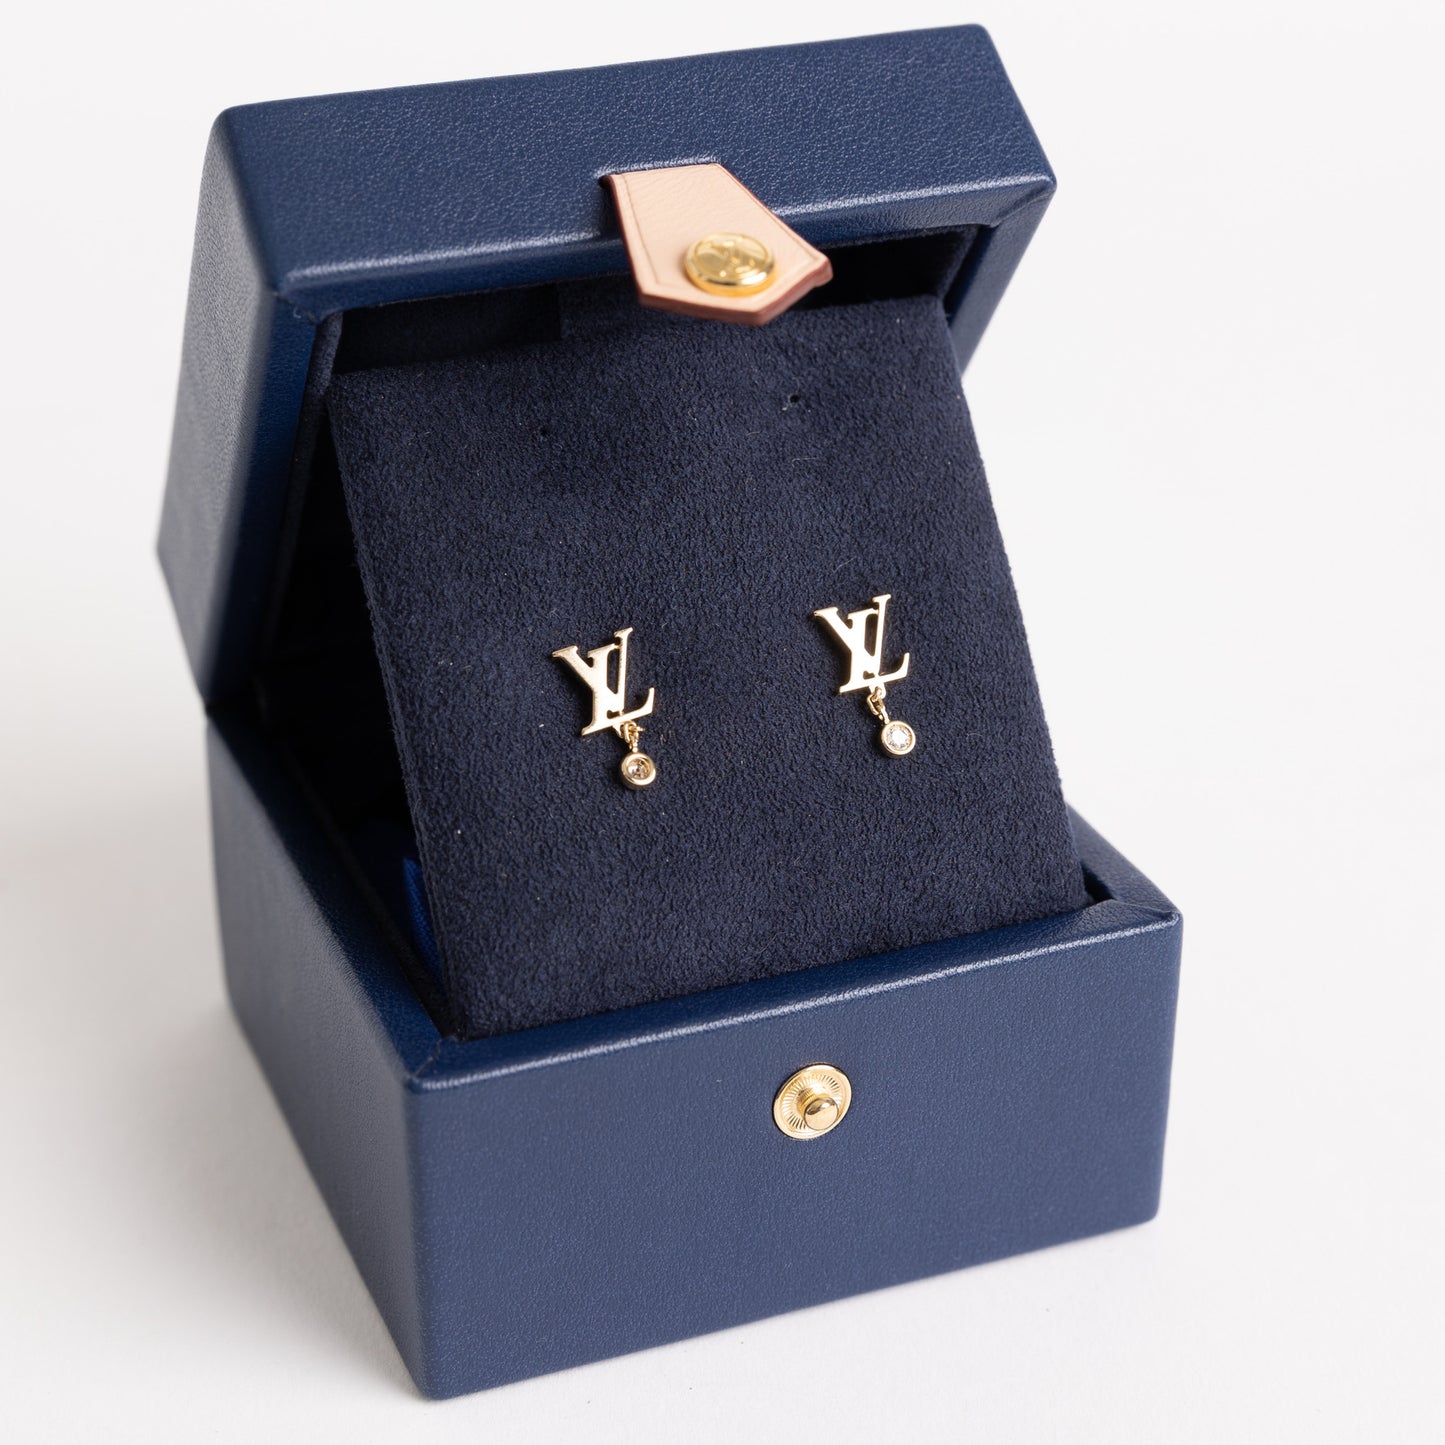 Louis Vuitton Idylle Blossom LV Ear Stud, White Gold And Diamond